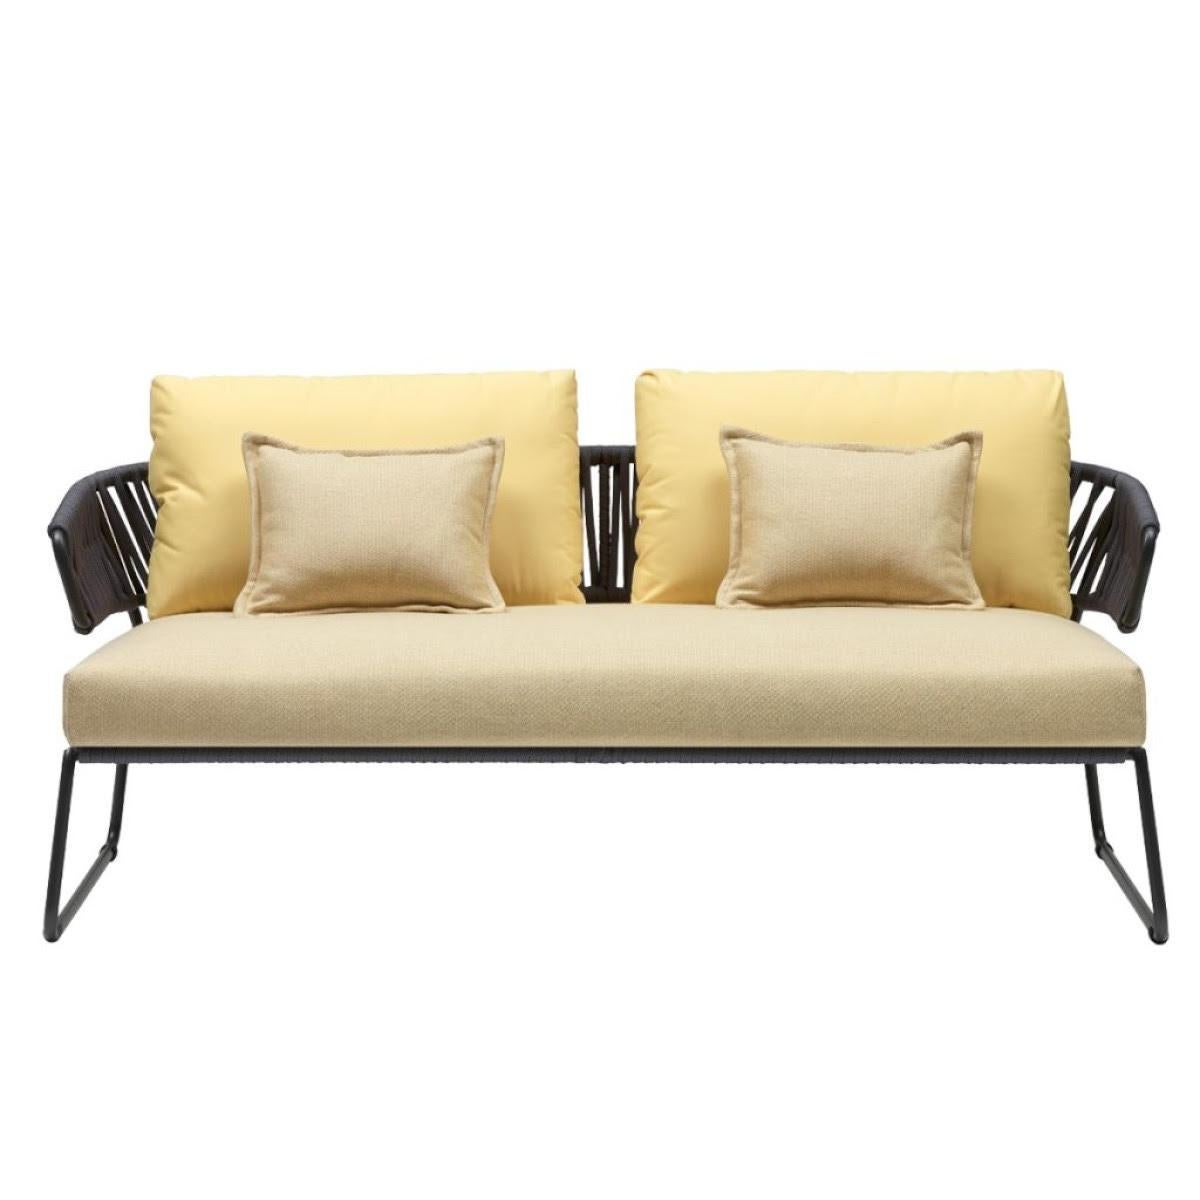 Contemporary Modern Grey Outdoor or Indoor Sofa in Metal and Cord, 21 Century For Sale